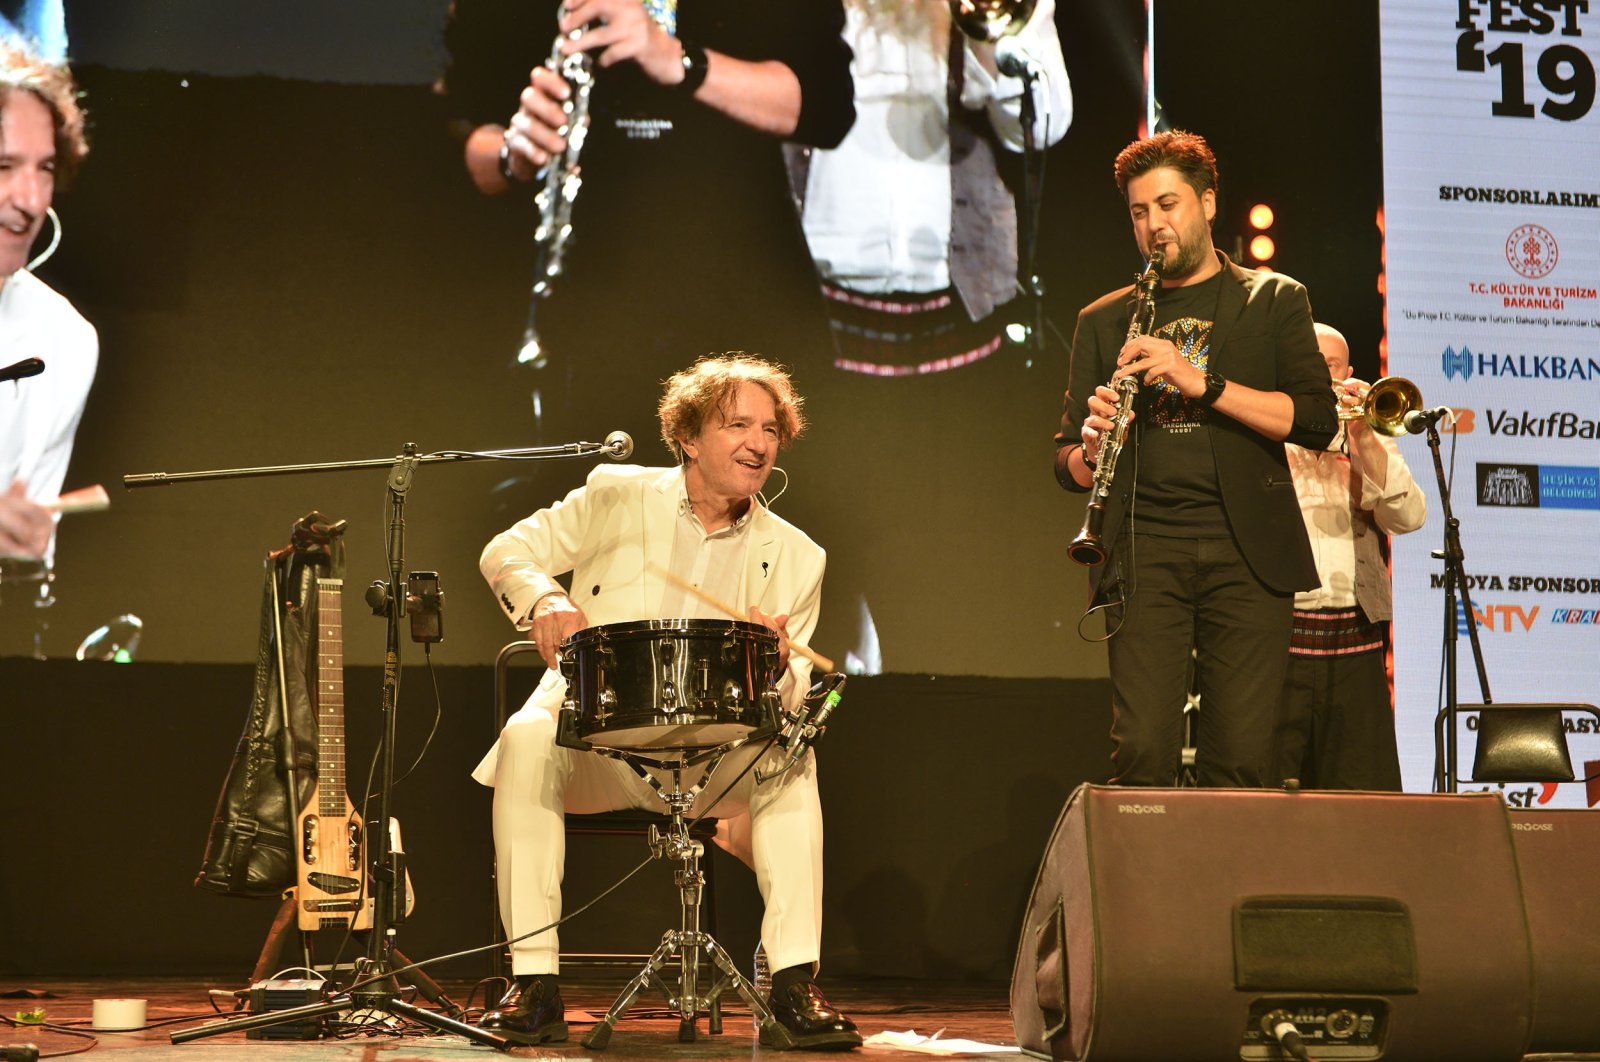 Goran Bregovic performs at the Bostancı Performance Center in Istanbul as part of the 8th Clarinet Festival, Turkey, Nov. 14, 2019. (Archive Photo)